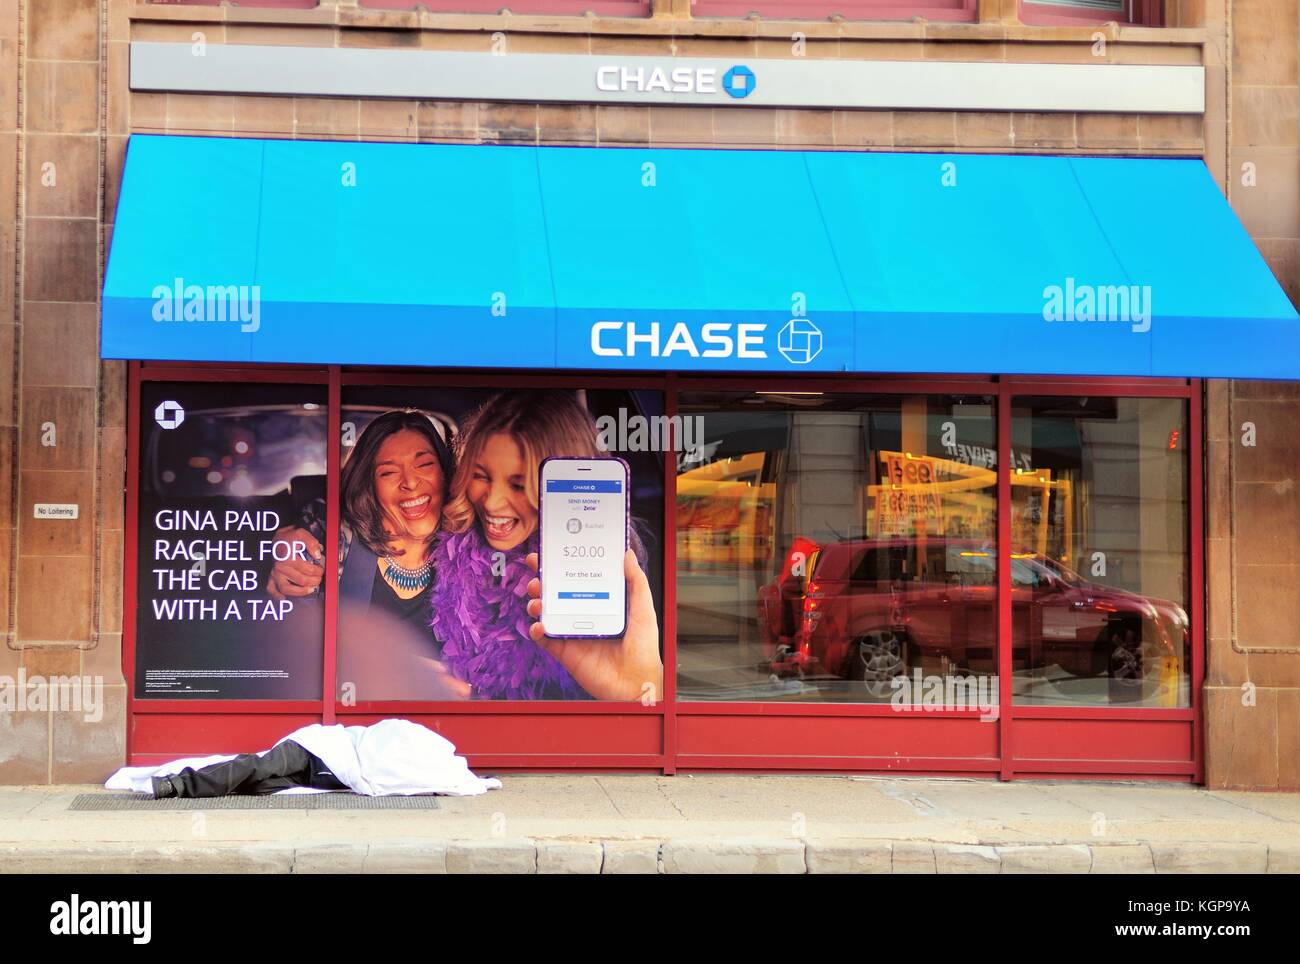 Social contrasts exist on a downtown Chicago street as a homeless man sleeps beneath a 'No Loitering' sign and a bank message. Chicago, Illinois, USA. Stock Photo